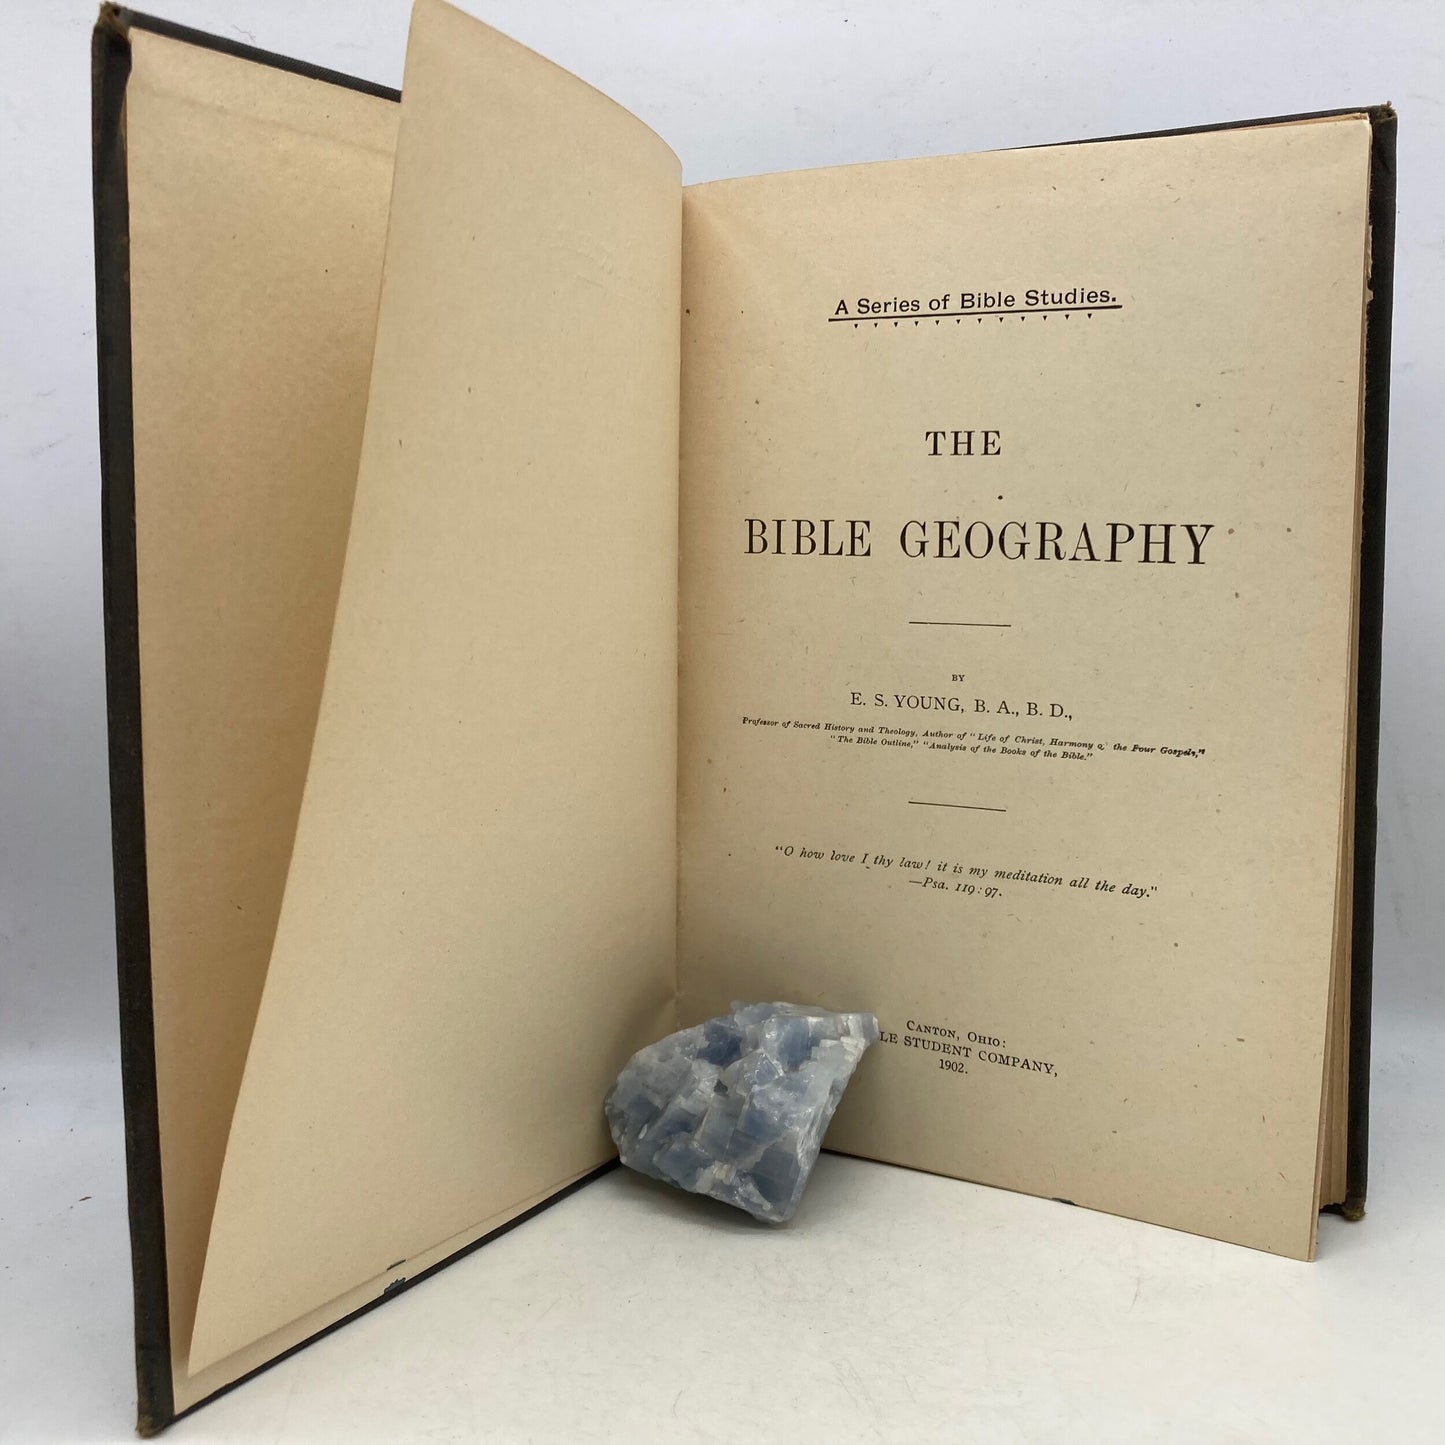 YOUNG, E.S. "The Bible Geography" [Bible Student Company, 1902] - Buzz Bookstore